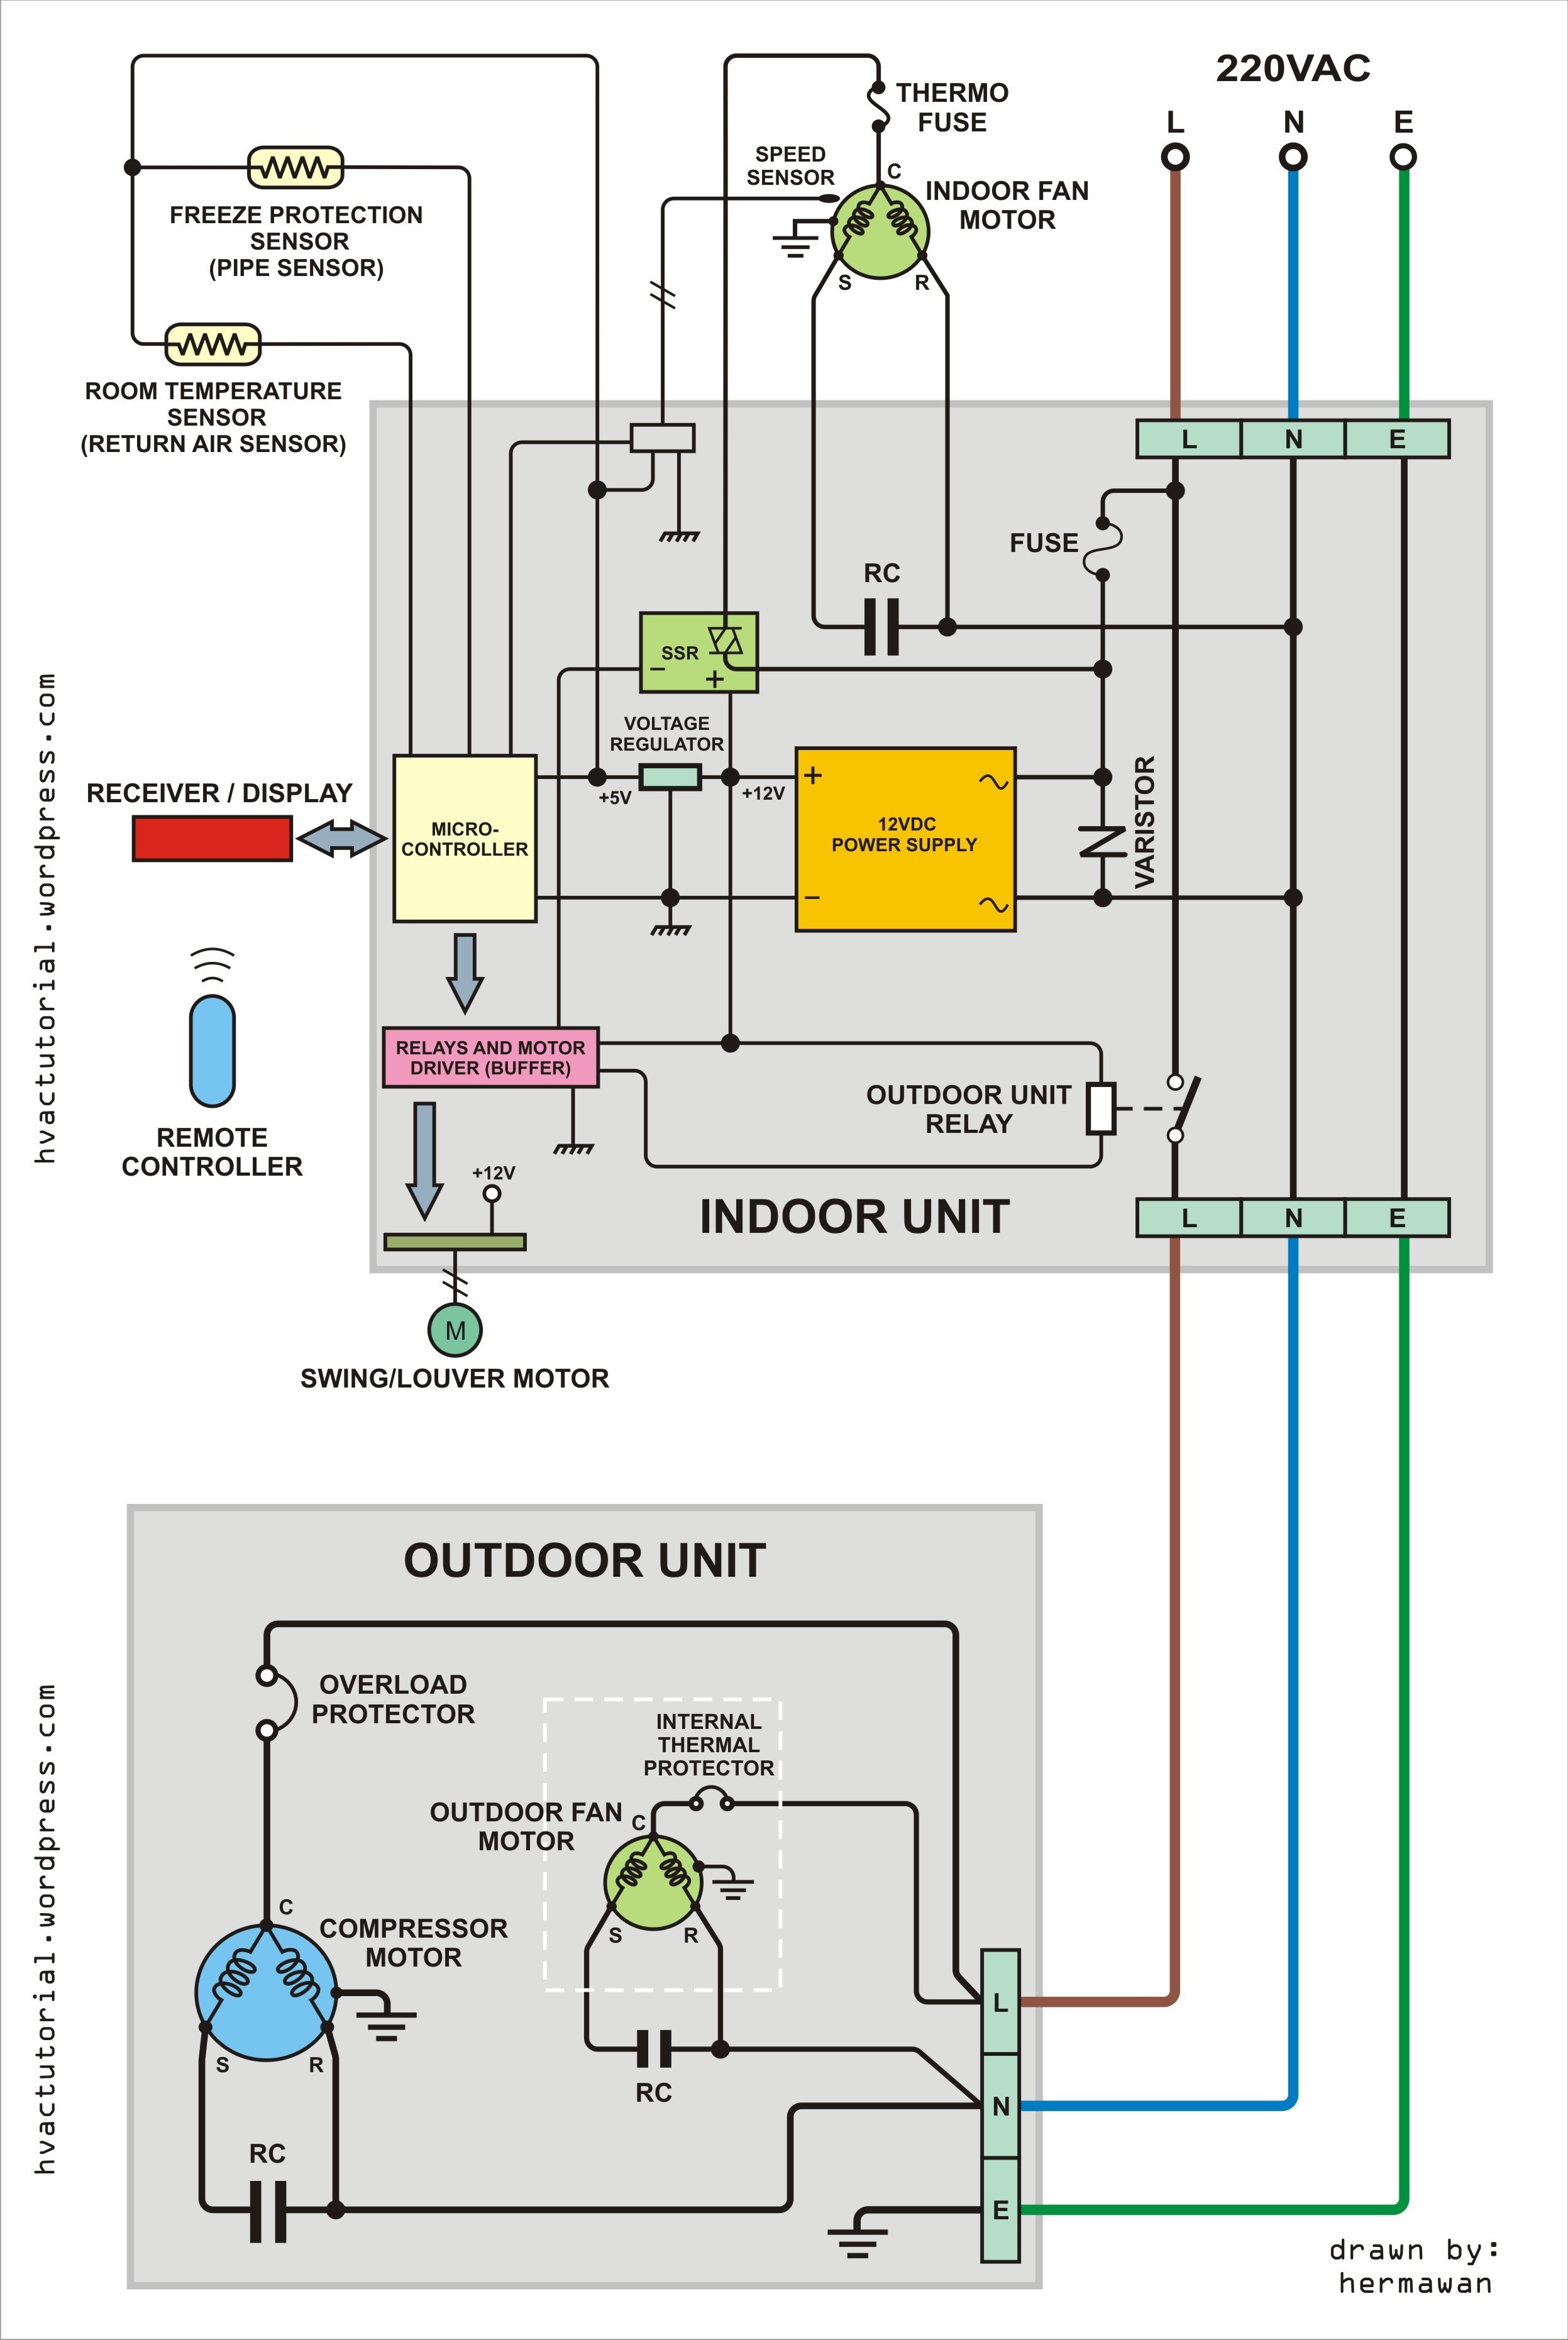 Goodman Heat Pump Package Unit Wiring Diagram New Central Air Conditioner Hvac Diagrams